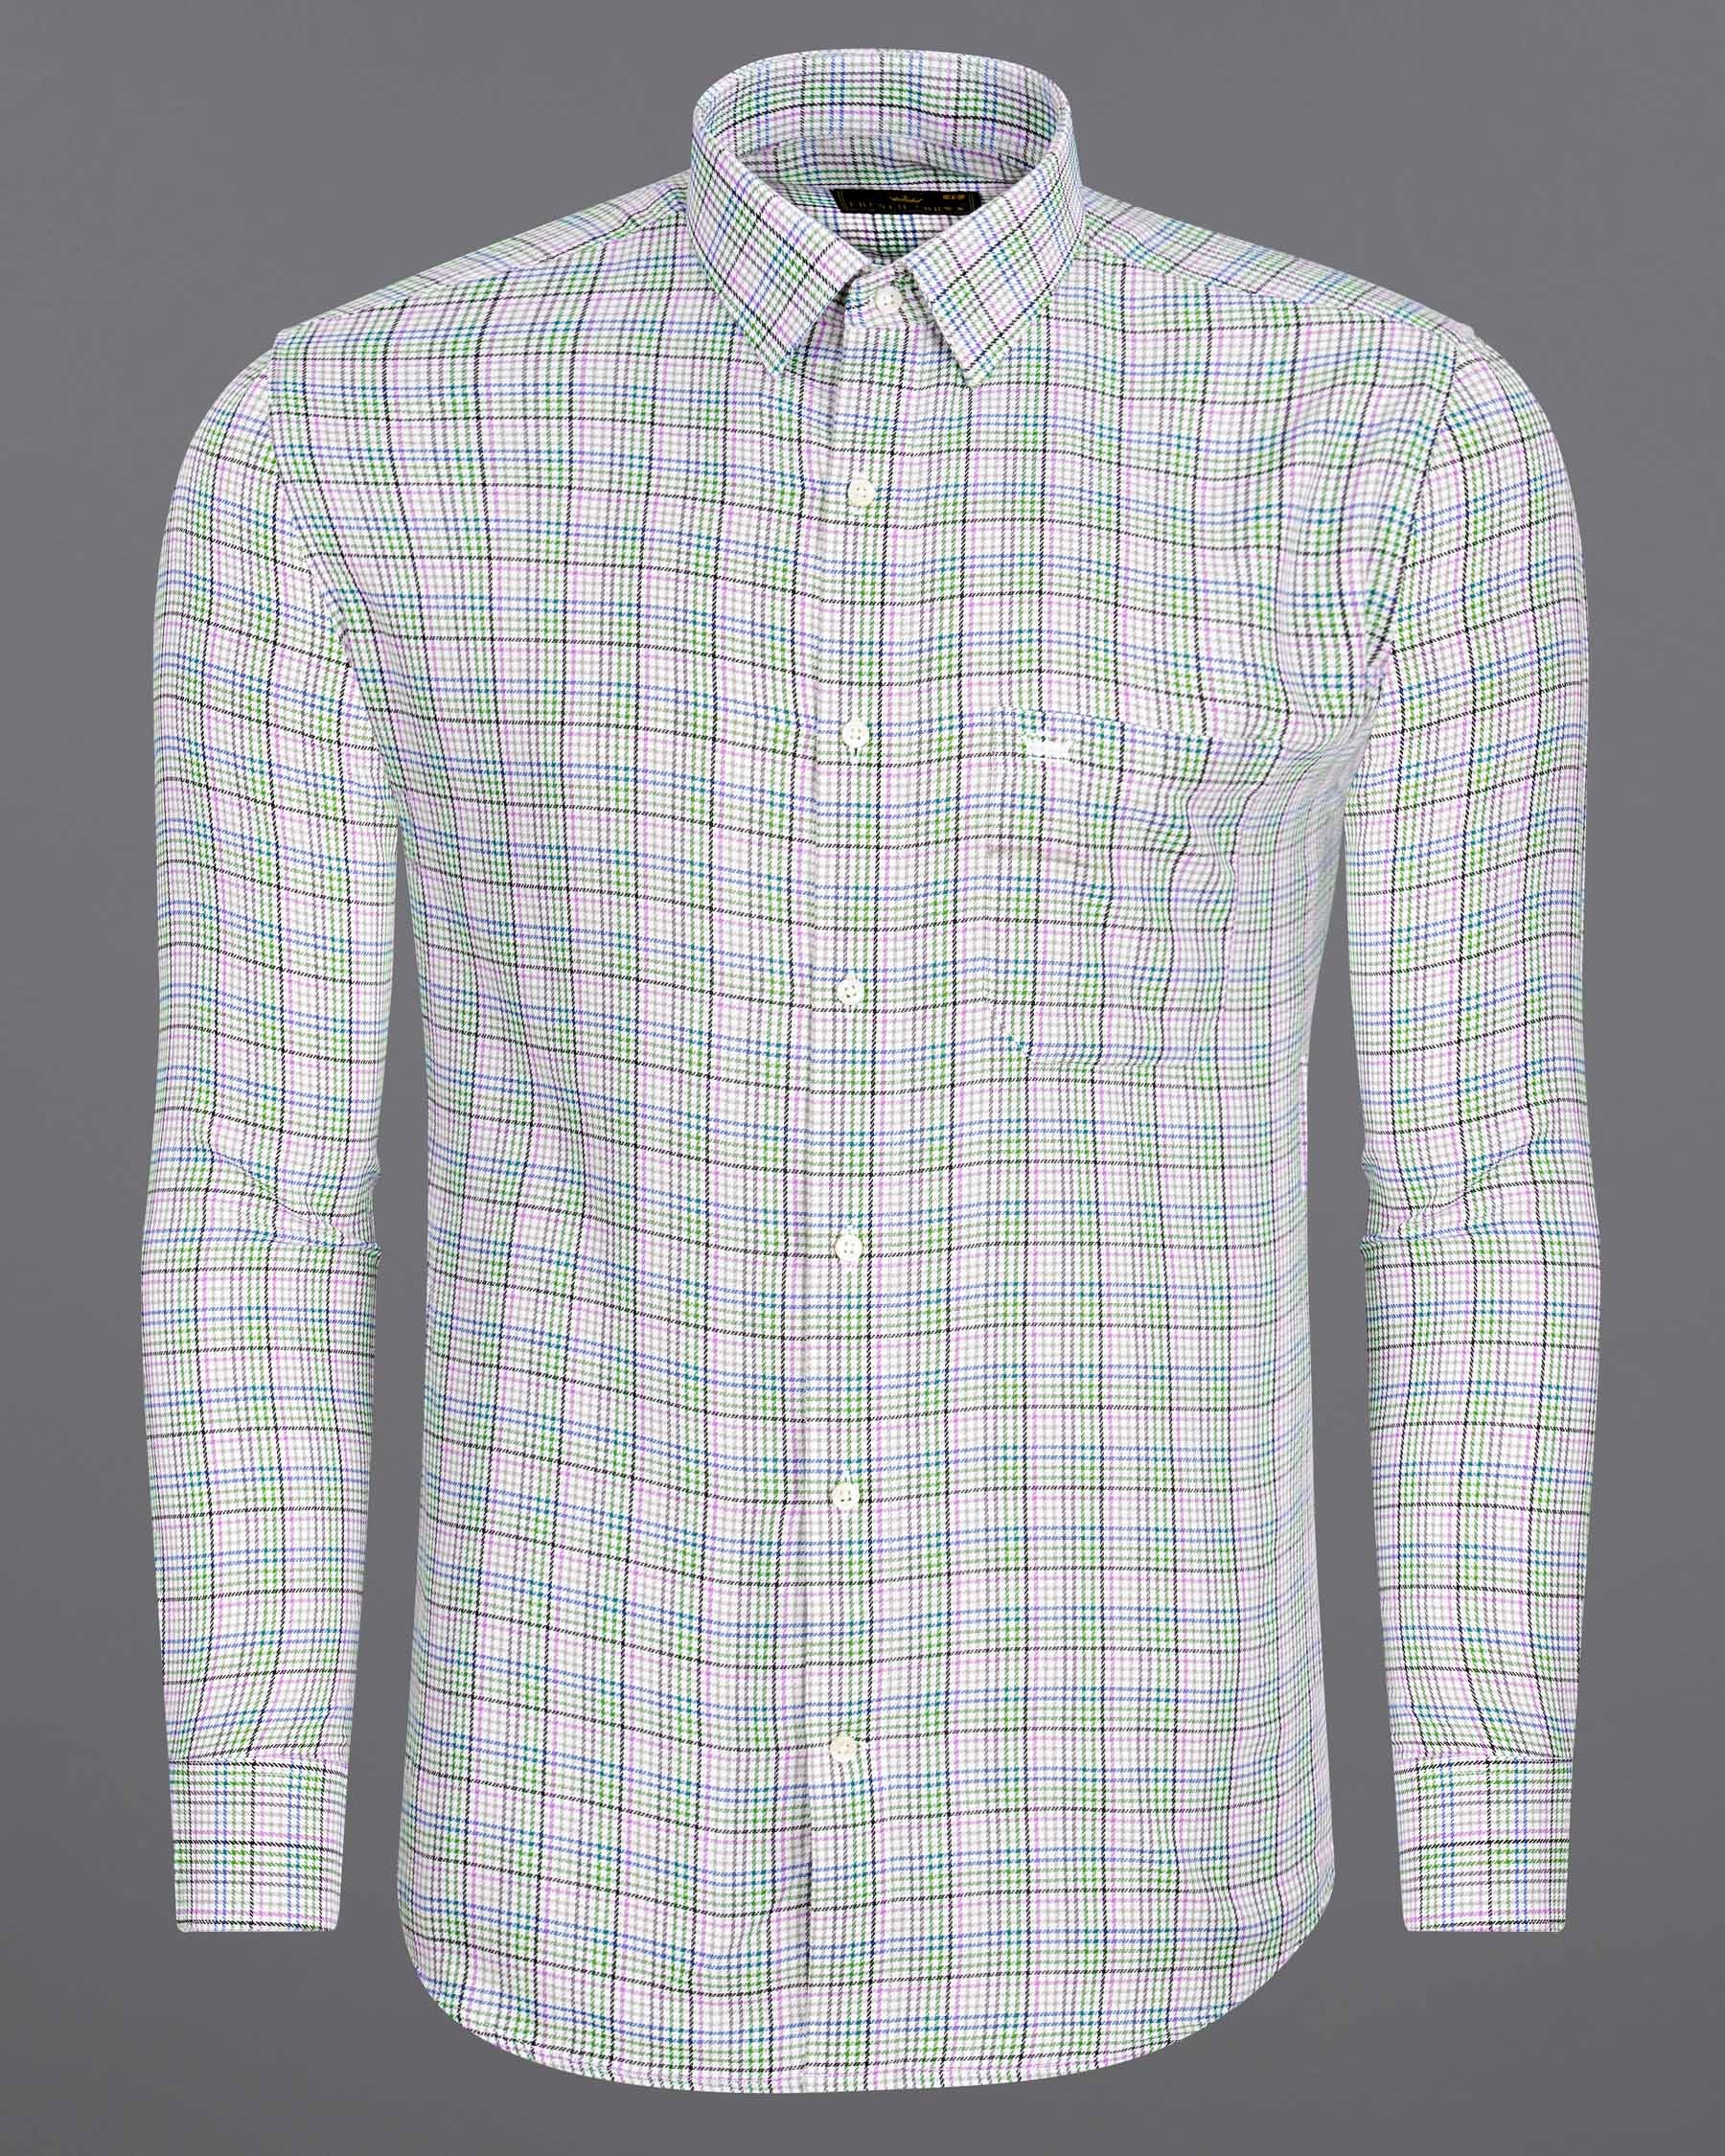 Mantis Green and White with Multi colored Plaid Twill Premium Cotton Shirt 7721-38, 7721-H-38, 7721-39,7721-H-39, 7721-40, 7721-H-40, 7721-42, 7721-H-42, 7721-44, 7721-H-44, 7721-46, 7721-H-46, 7721-48, 7721-H-48, 7721-50, 7721-H-50, 7721-52, 7721-H-52